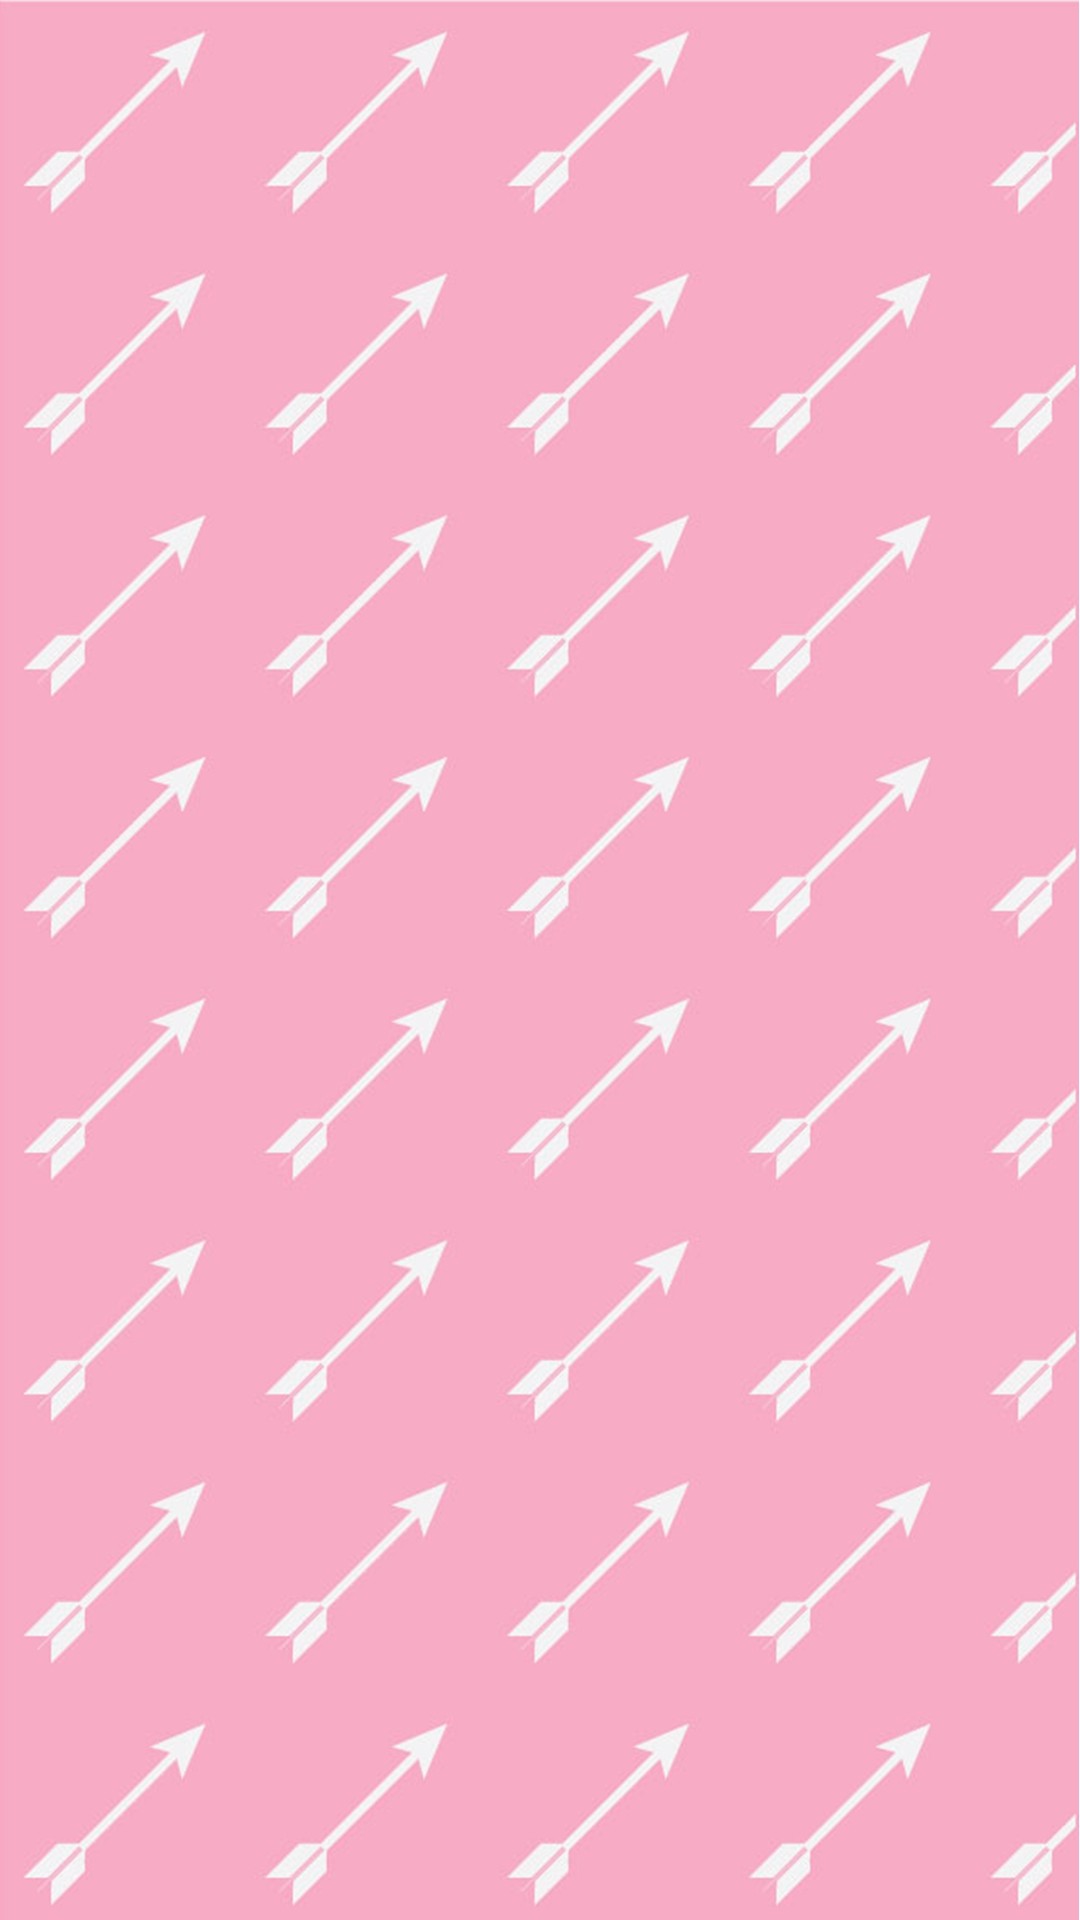 1080x1920 Pink Background White Arrows Pattern iPhone 6 wallpaper